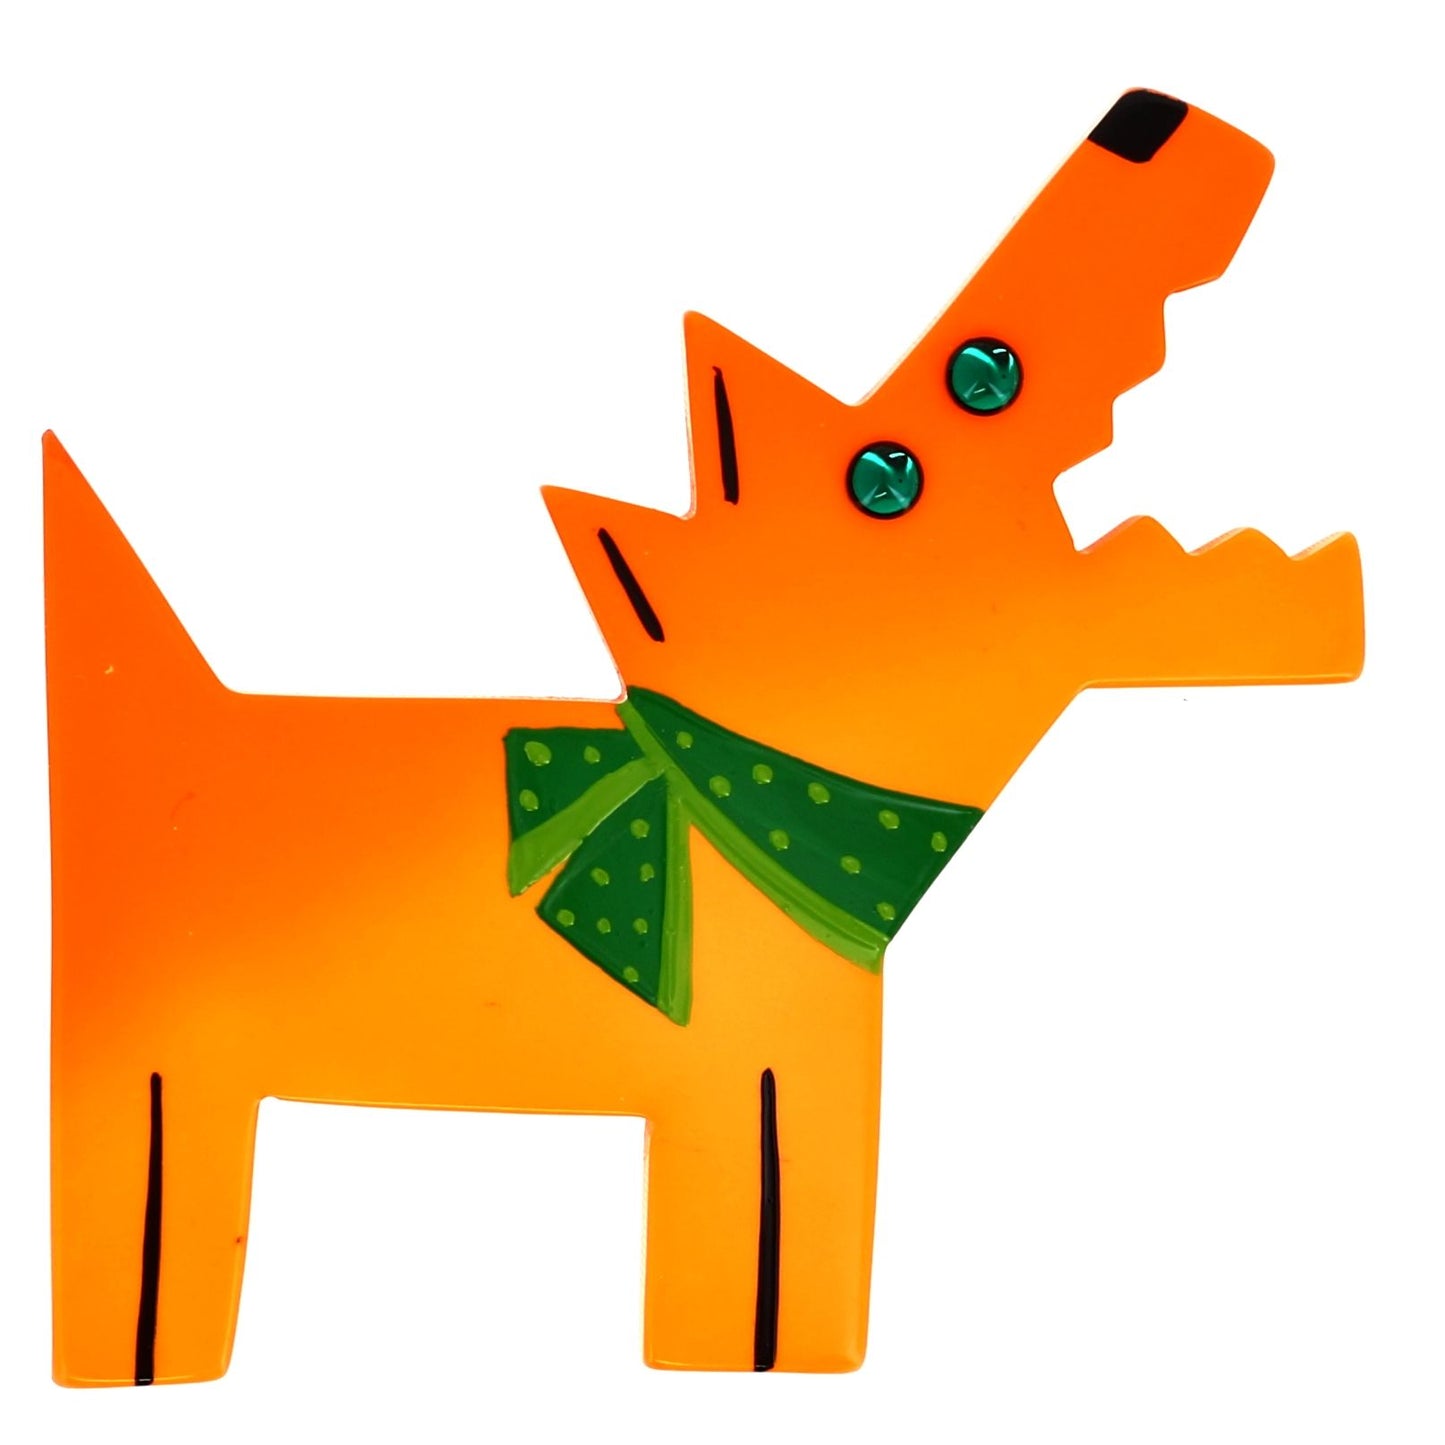 Barky, the Pirate's dog, orange and green, in galalith